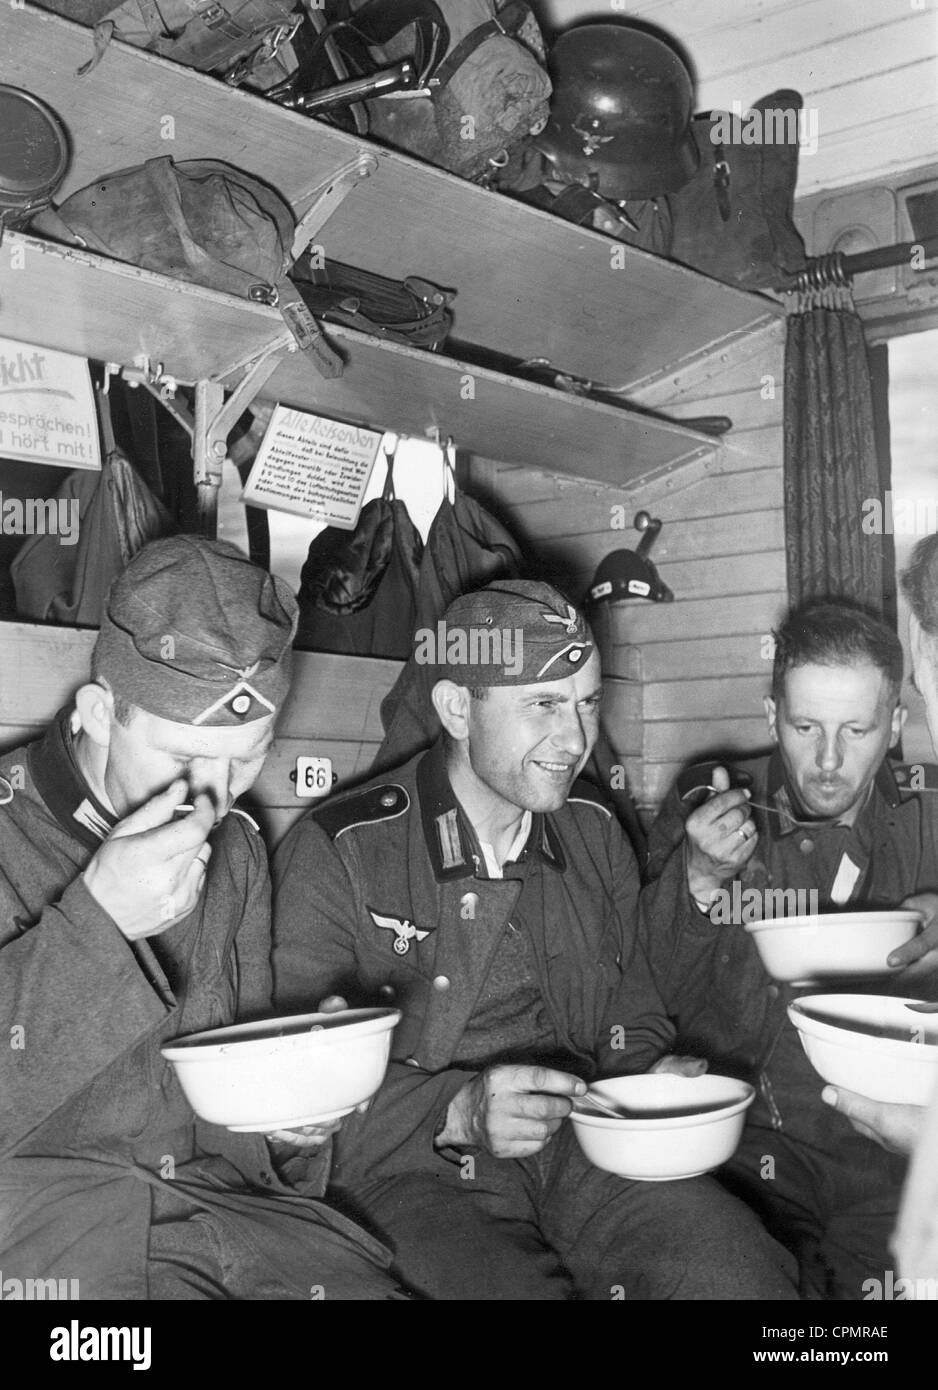 German soldiers eat in the train compartment, 1941 Stock Photo